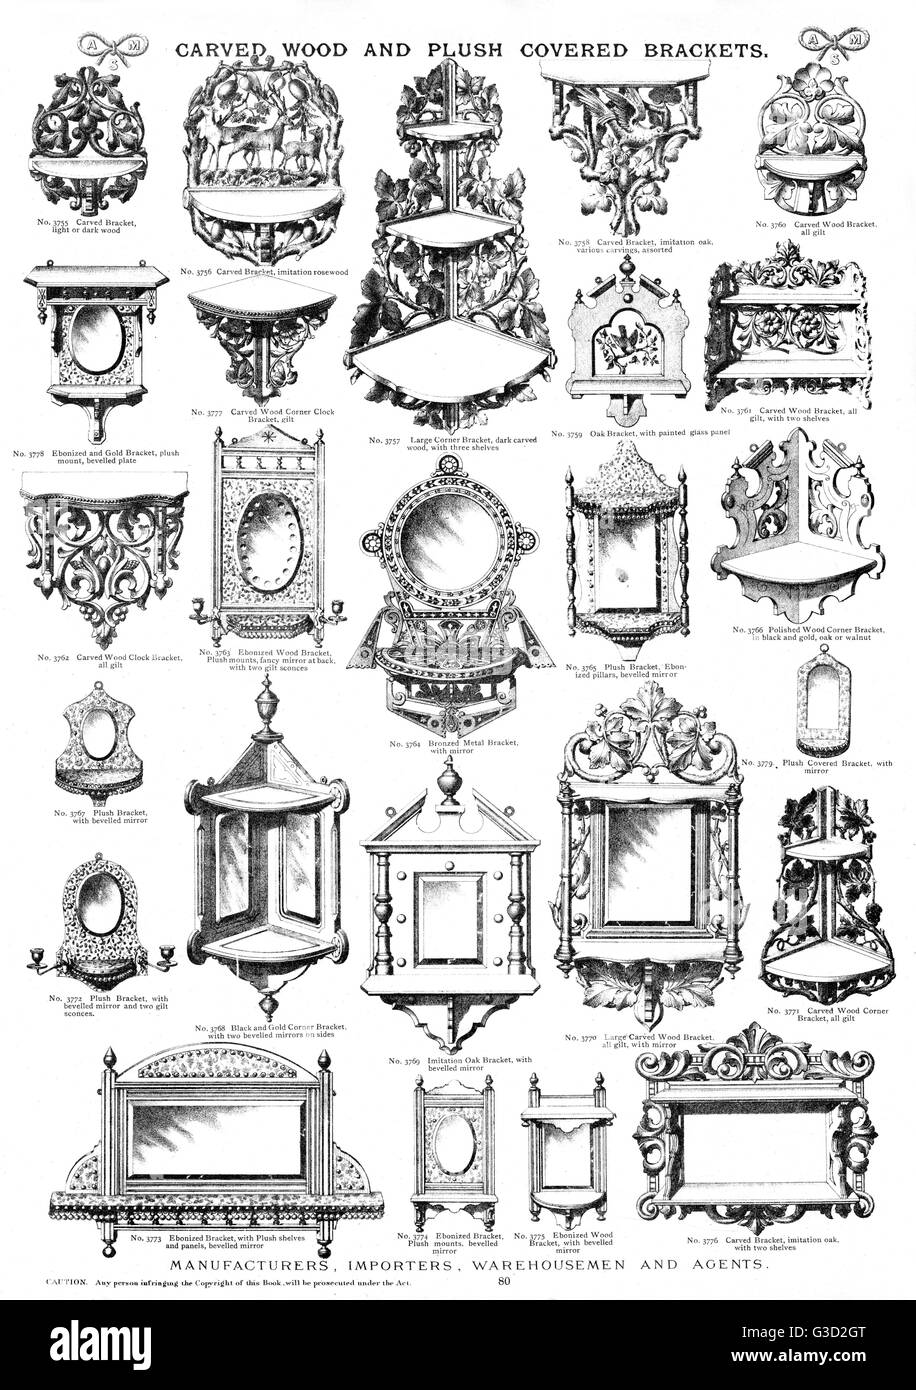 Carved Wood and Plush Covered Brackets, Plate 80 Stock Photo